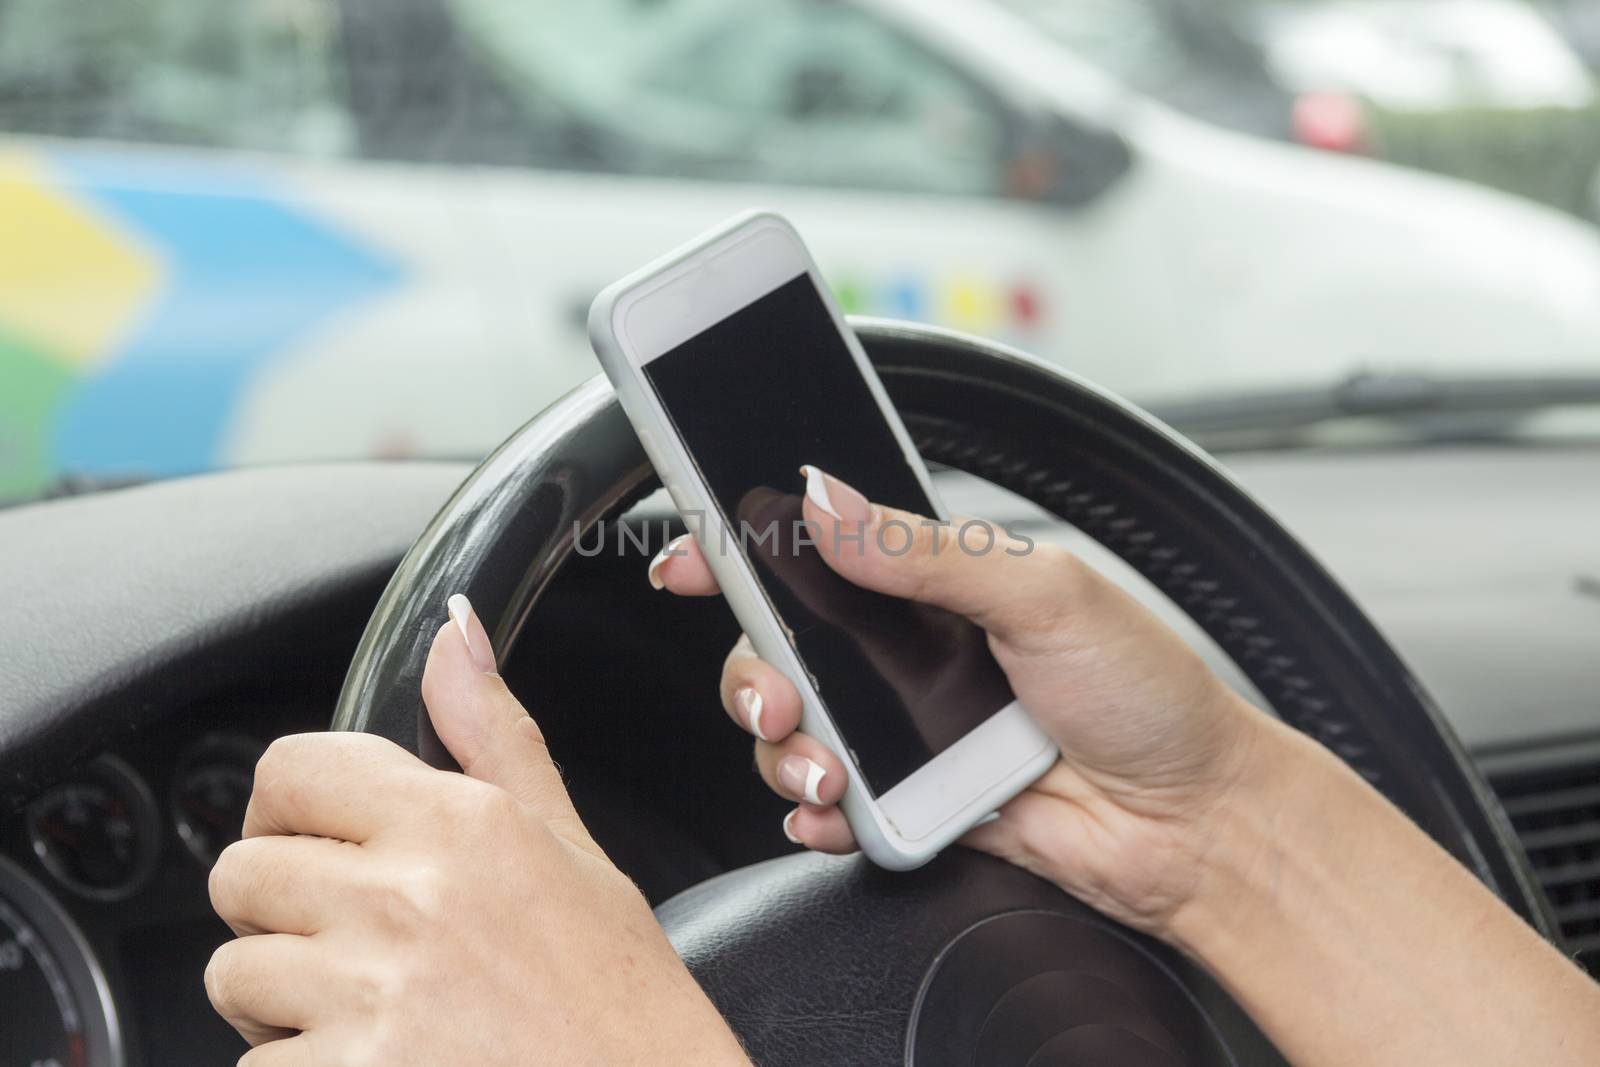 driving in a car in the hands of the girl cell phone